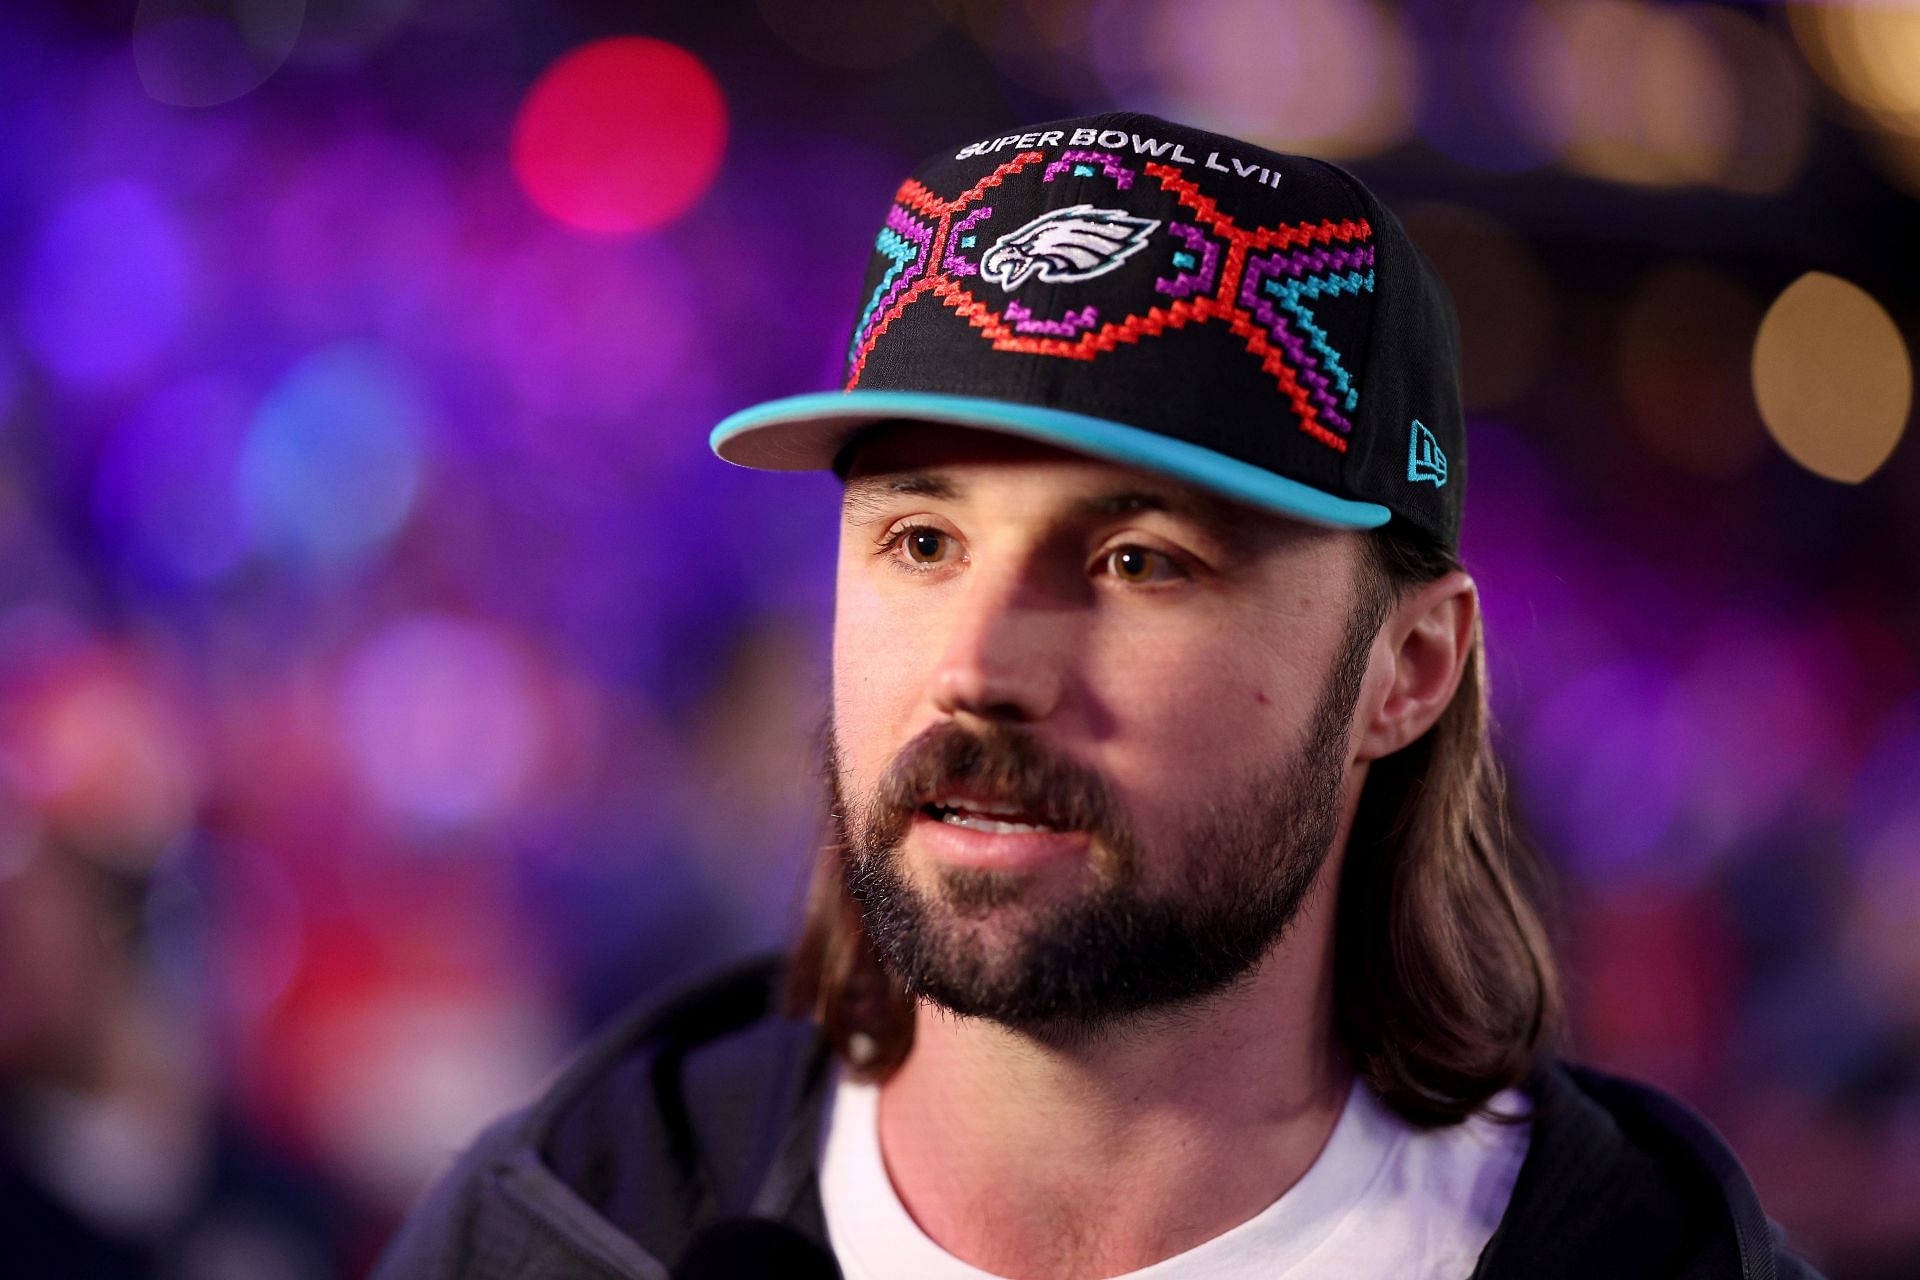 Gardner Minshew at Super Bowl LVII Opening Night presented by Fast Twitch